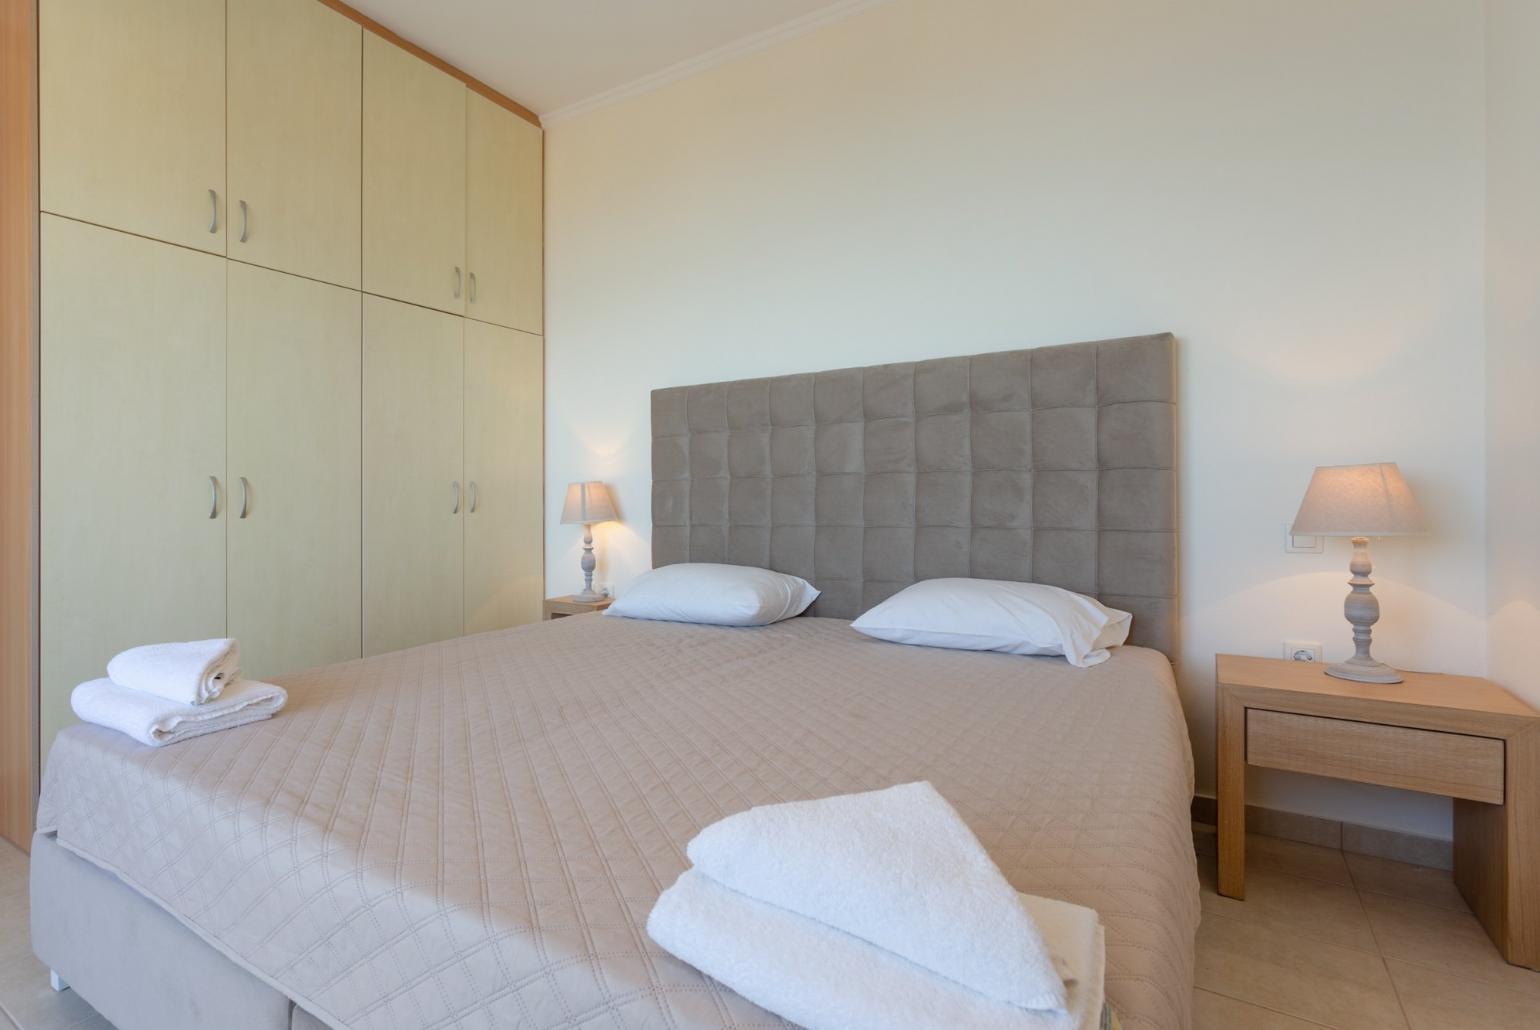 Double bedroom with A/C and balcony access with panoramic sea views